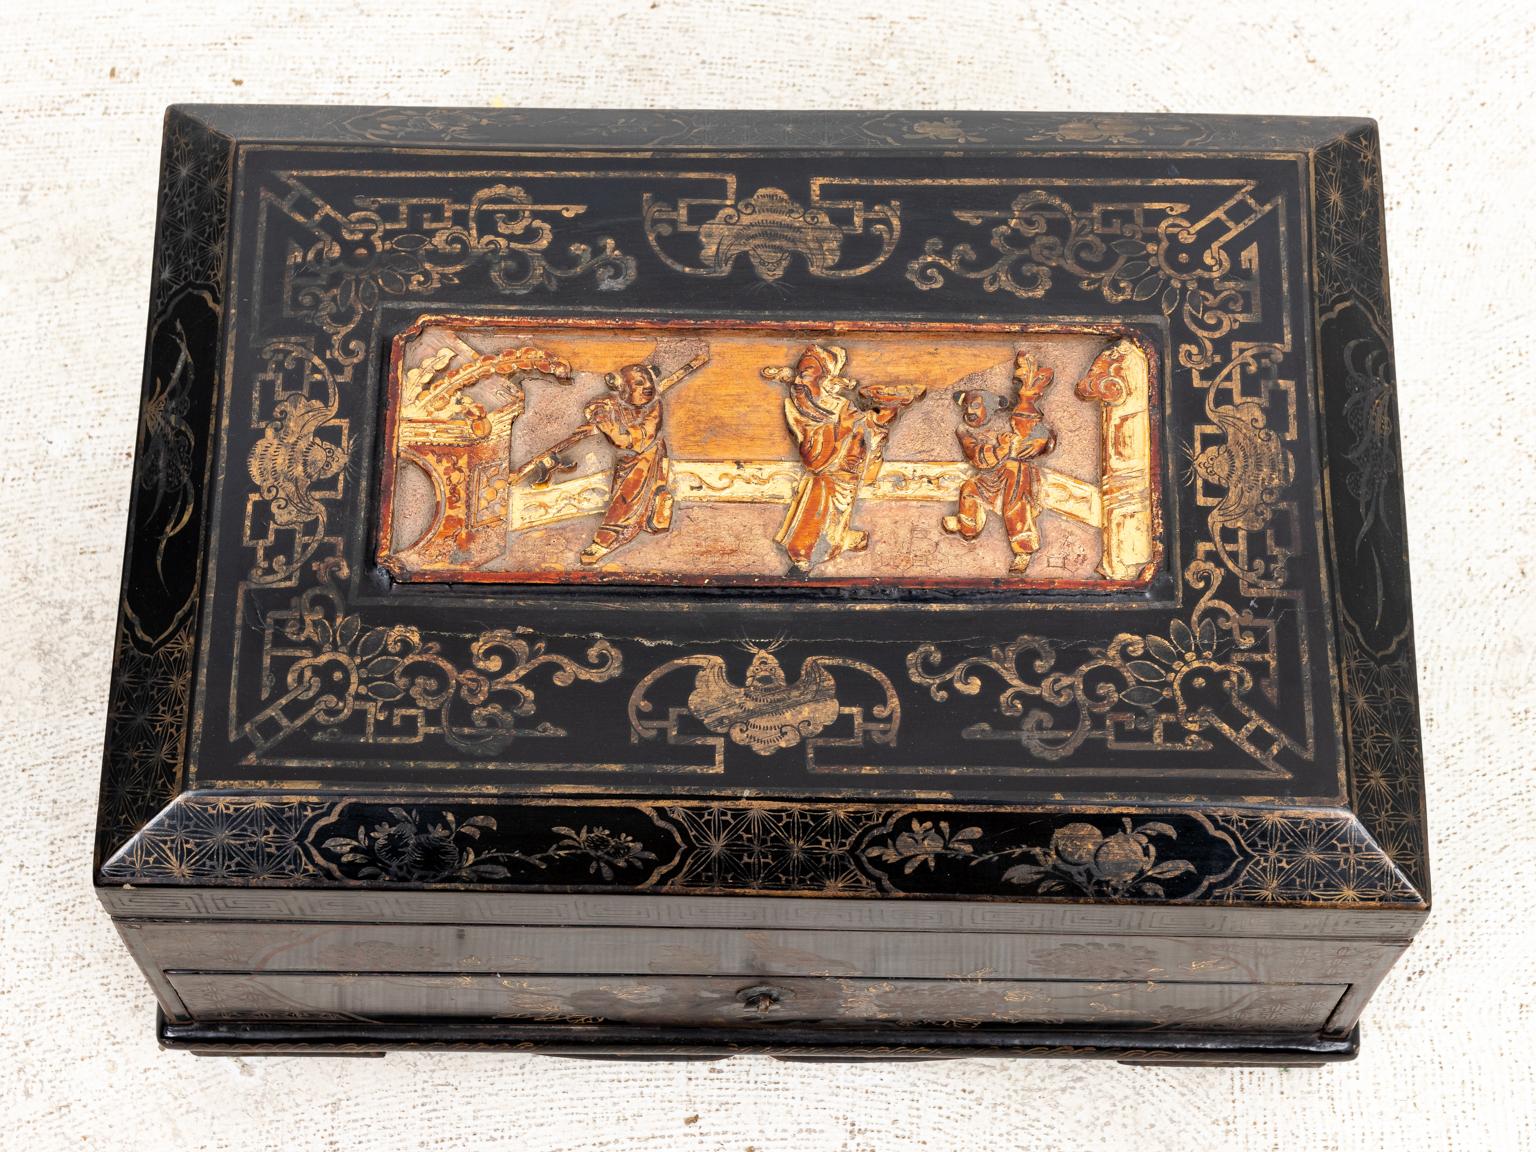 Painted Chinese style box ornamented throughout with motifs such as flowers, birds, and Greek key trim. The piece also features a carved panel on the lid with three figures. Please note of wear consistent with age including paint loss, finish loss,